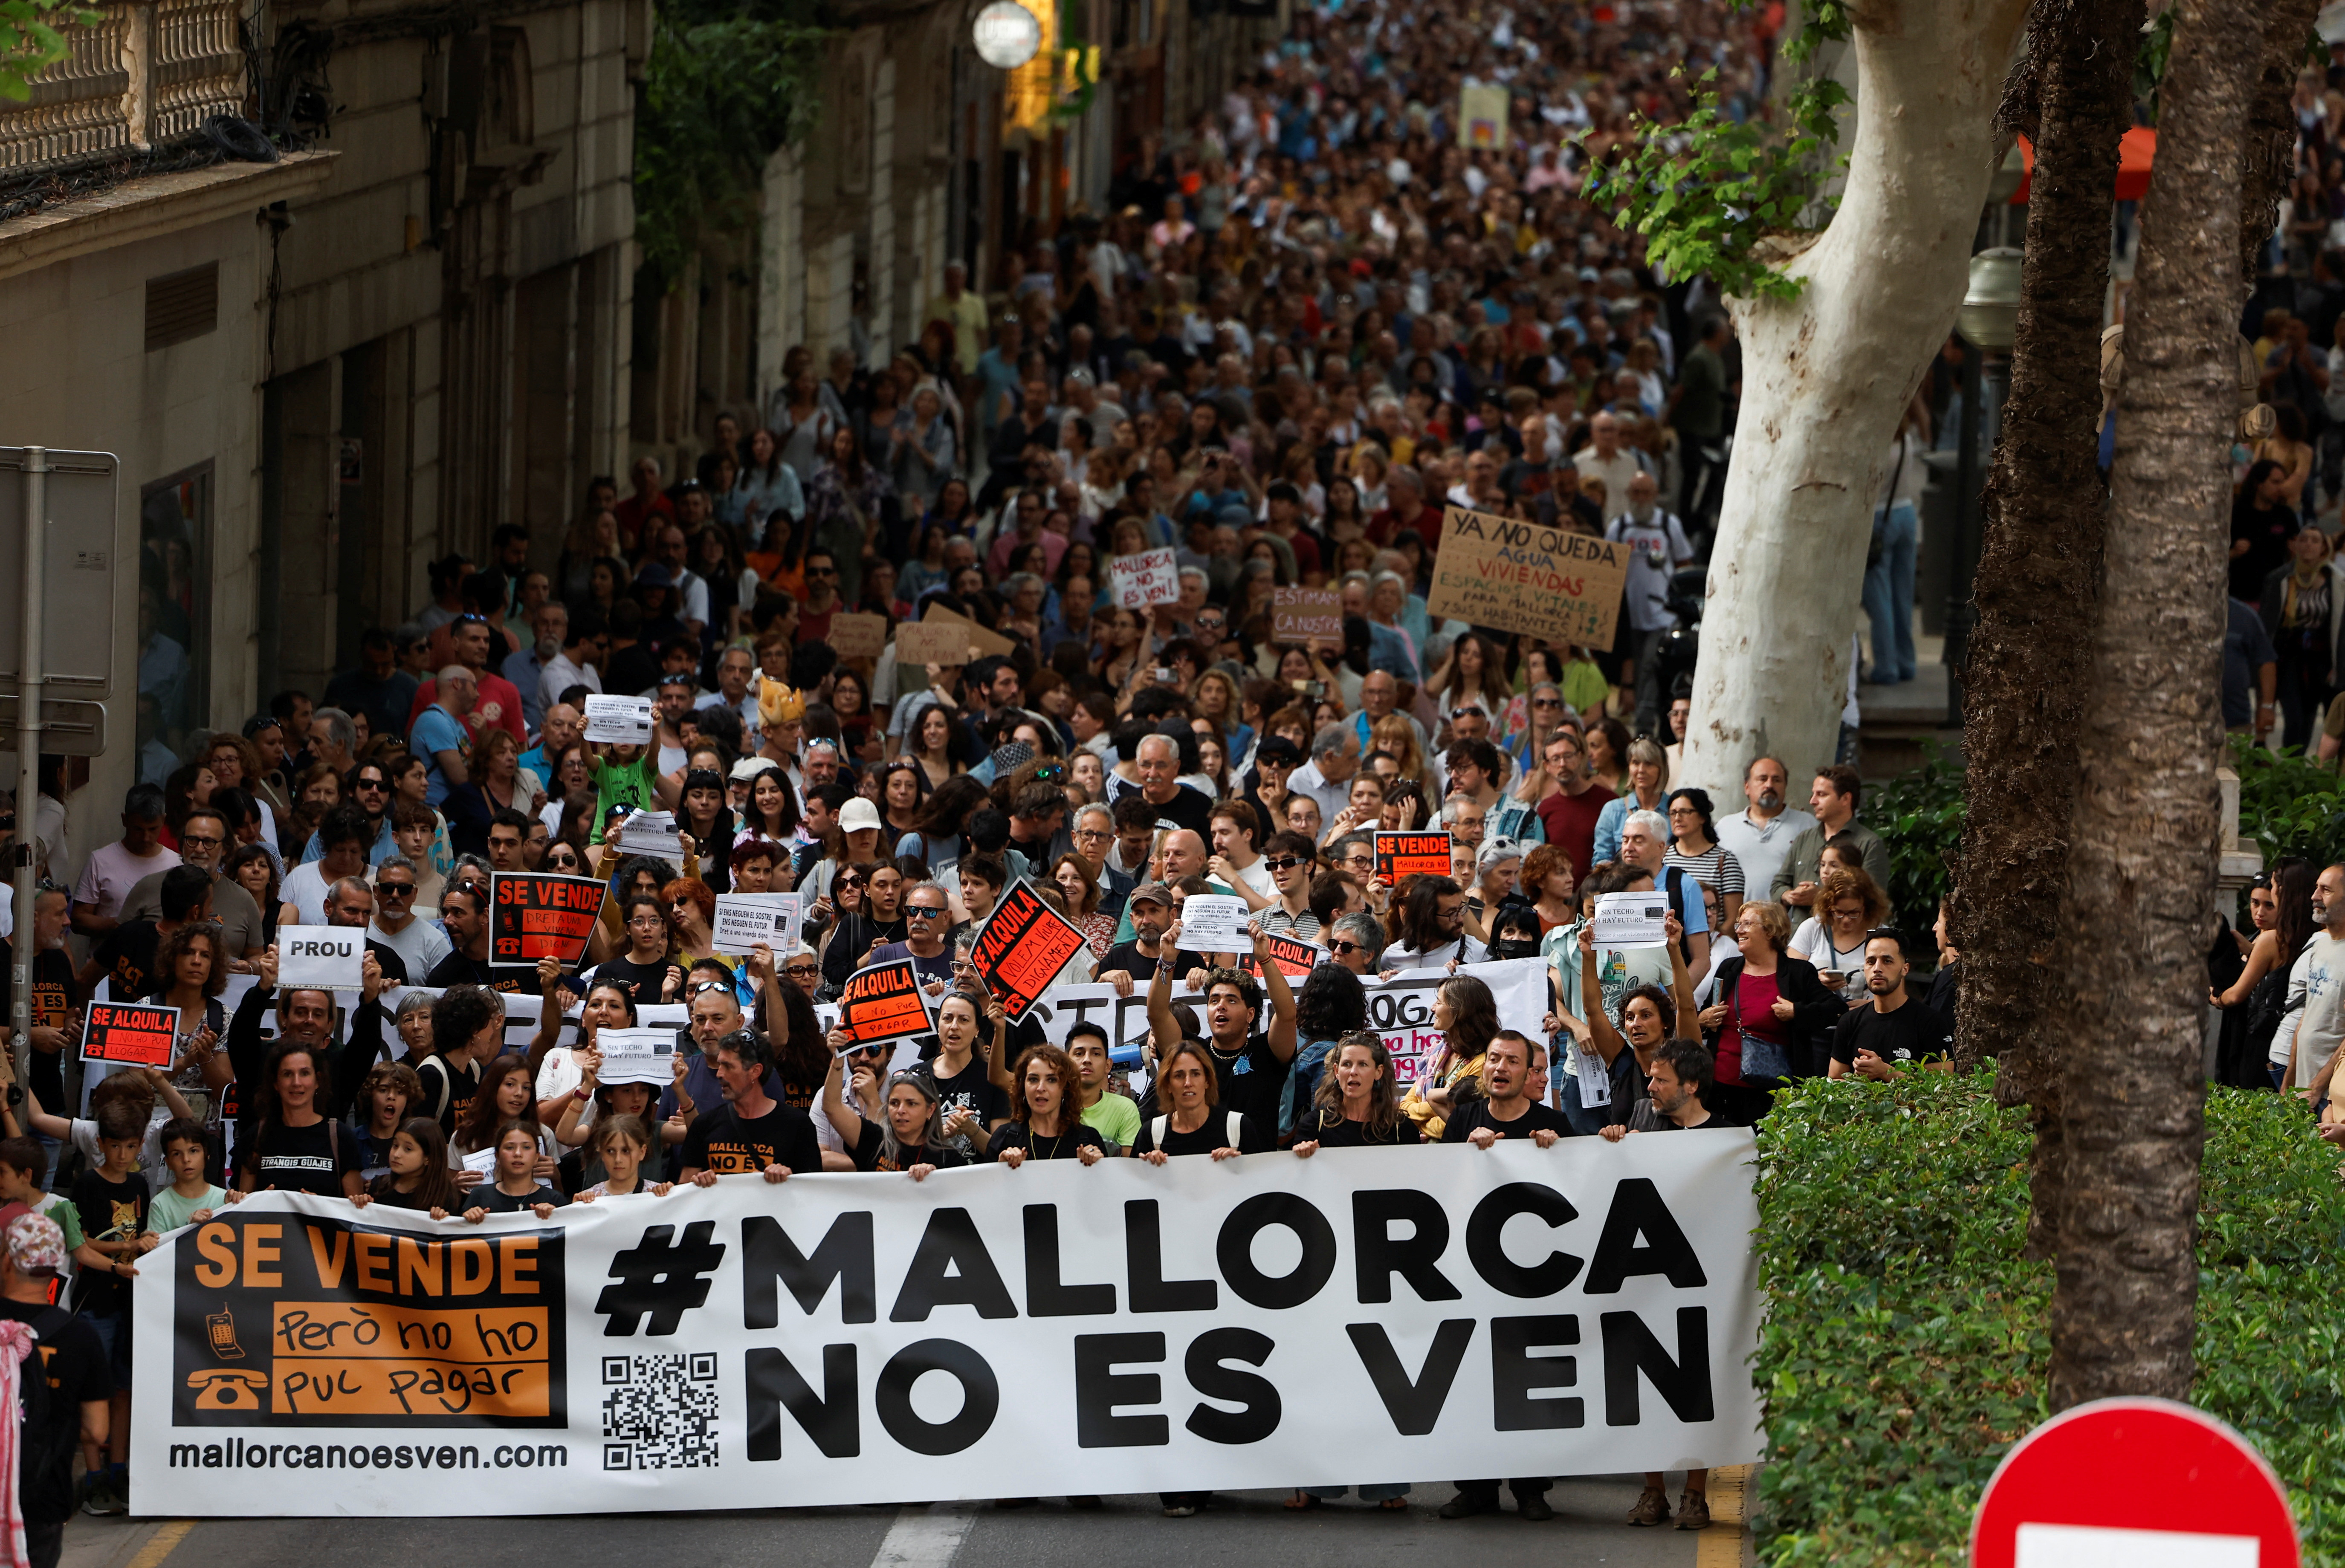 Protest against mass tourism and gentrification in Palma de Mallorca